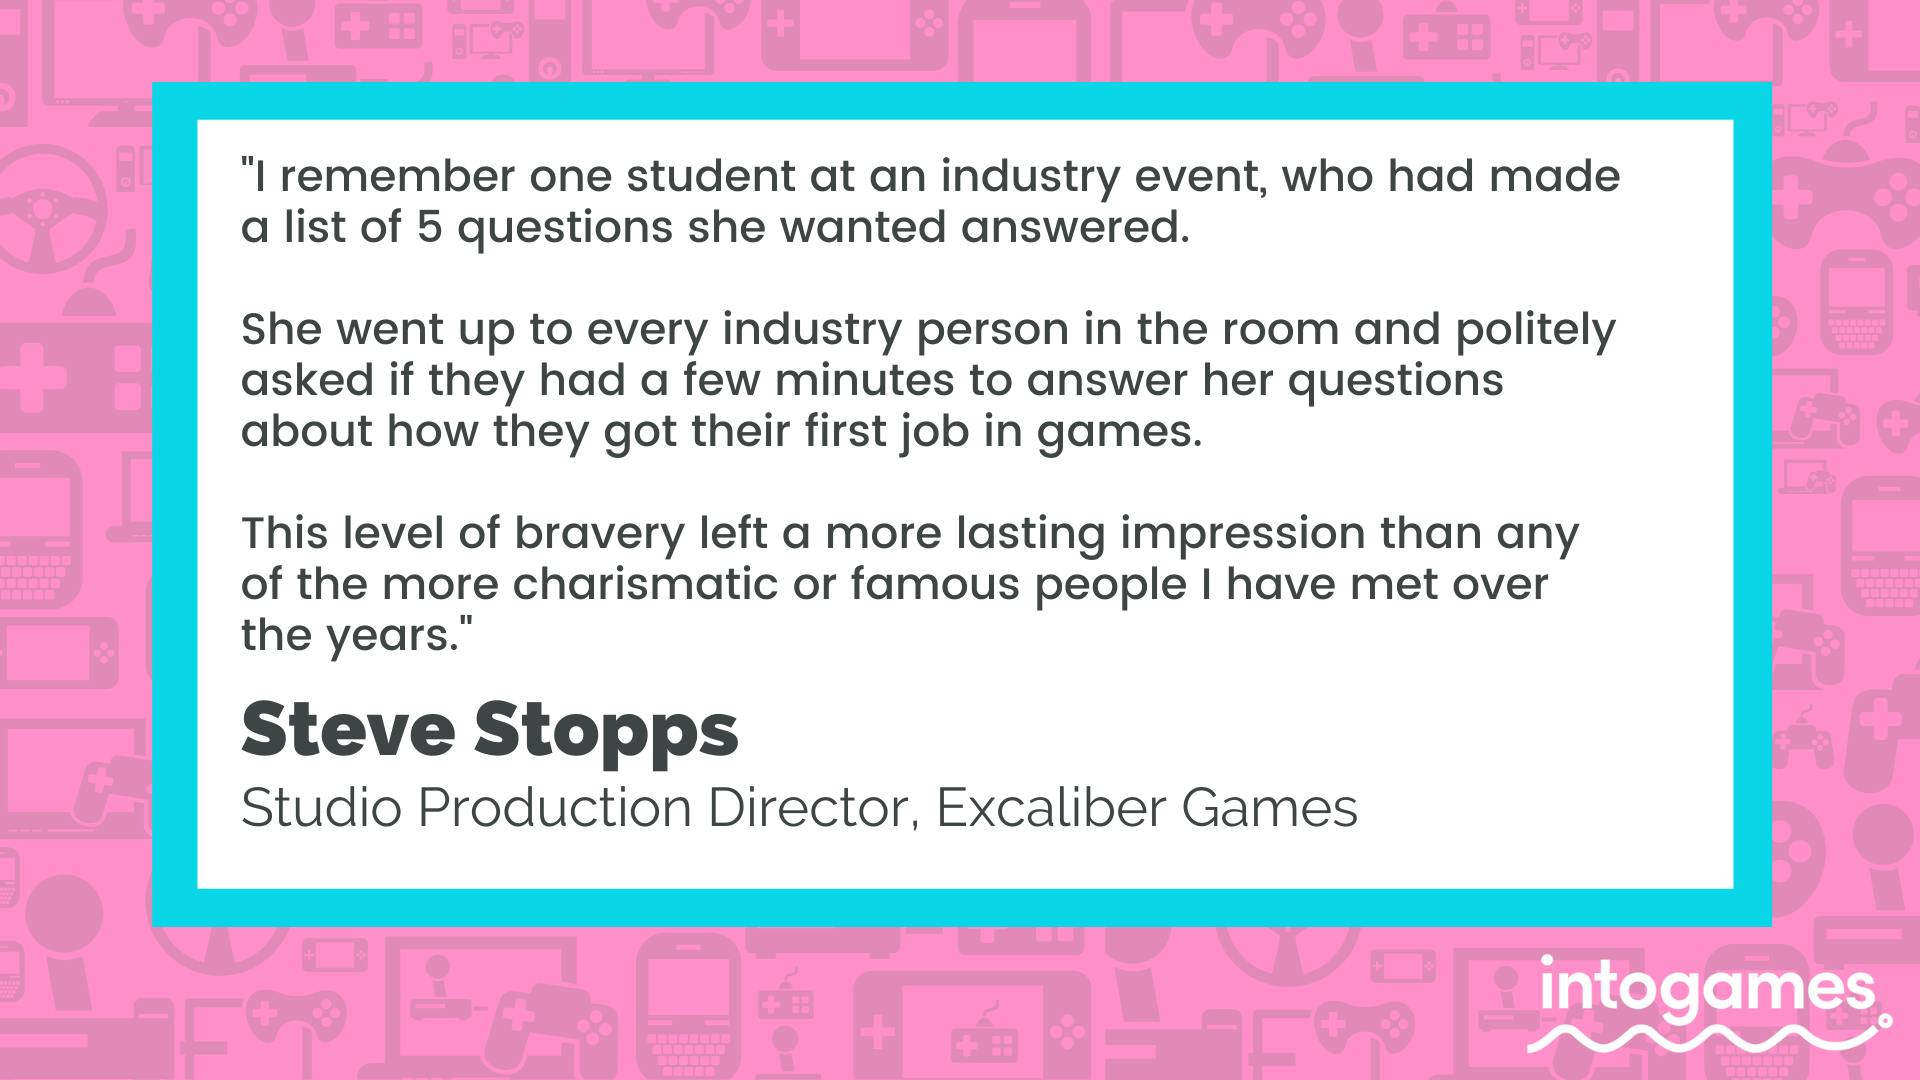 "I remember one student at an industry event, who had made a list of 5 questions she wanted answered. She went up to every industry person in the room and politely asked if they had a few minutes to answer her questions about how they got their first job in games. This level of bravery left a more lasting impression than any of the more charismatic or famous people I have ever met over the years." - Steve Stopps, Studio Production Director, Excalibur Games. 